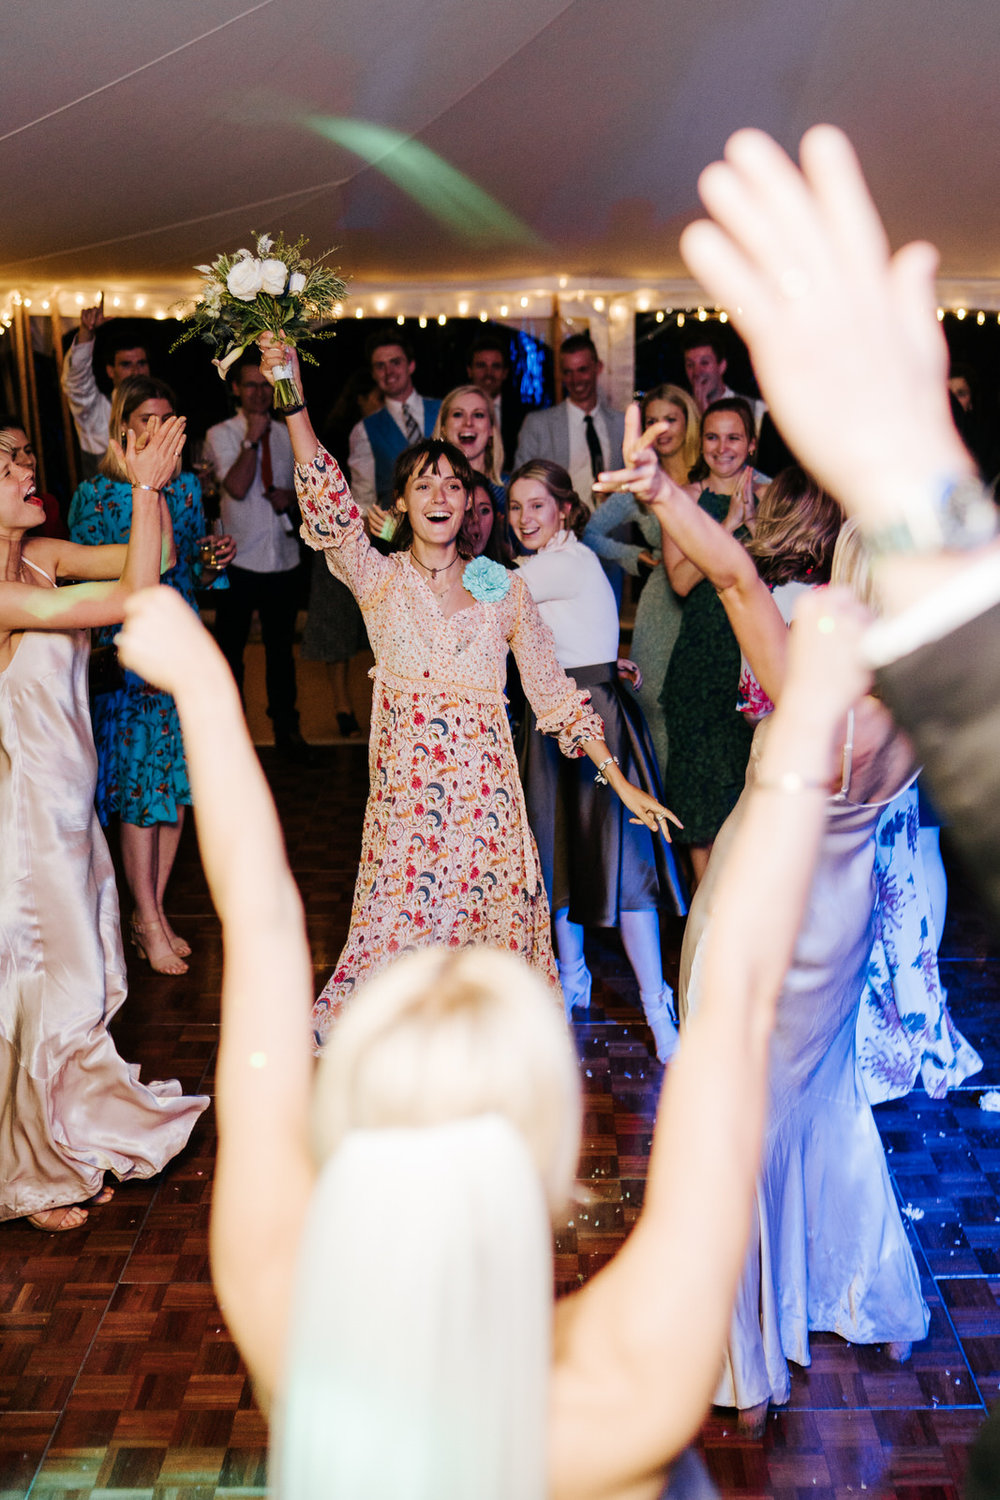  Guest emerges victorious and catches bouquet that bride threw 